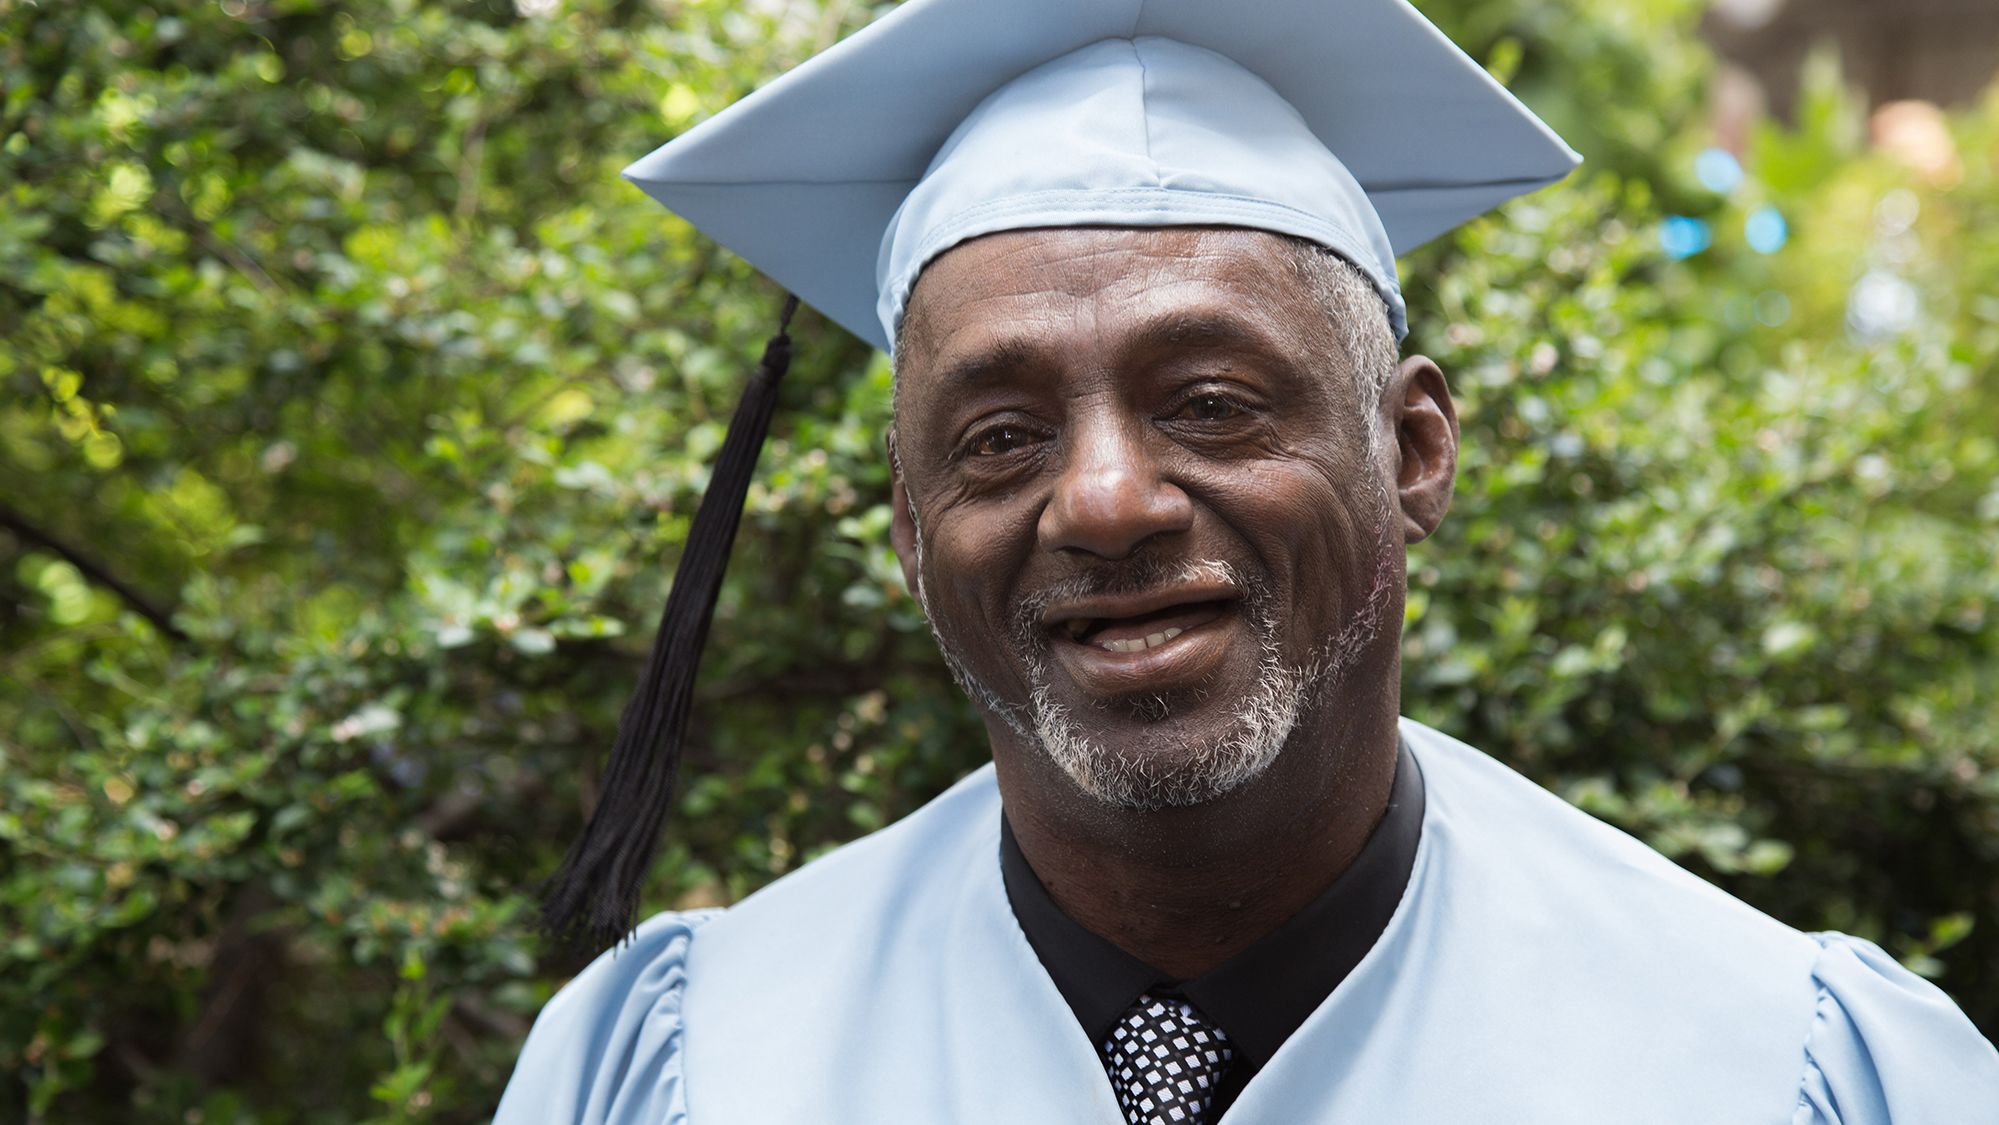 Columbia graduate David Norman continues to mentor those who have been incarcerated.